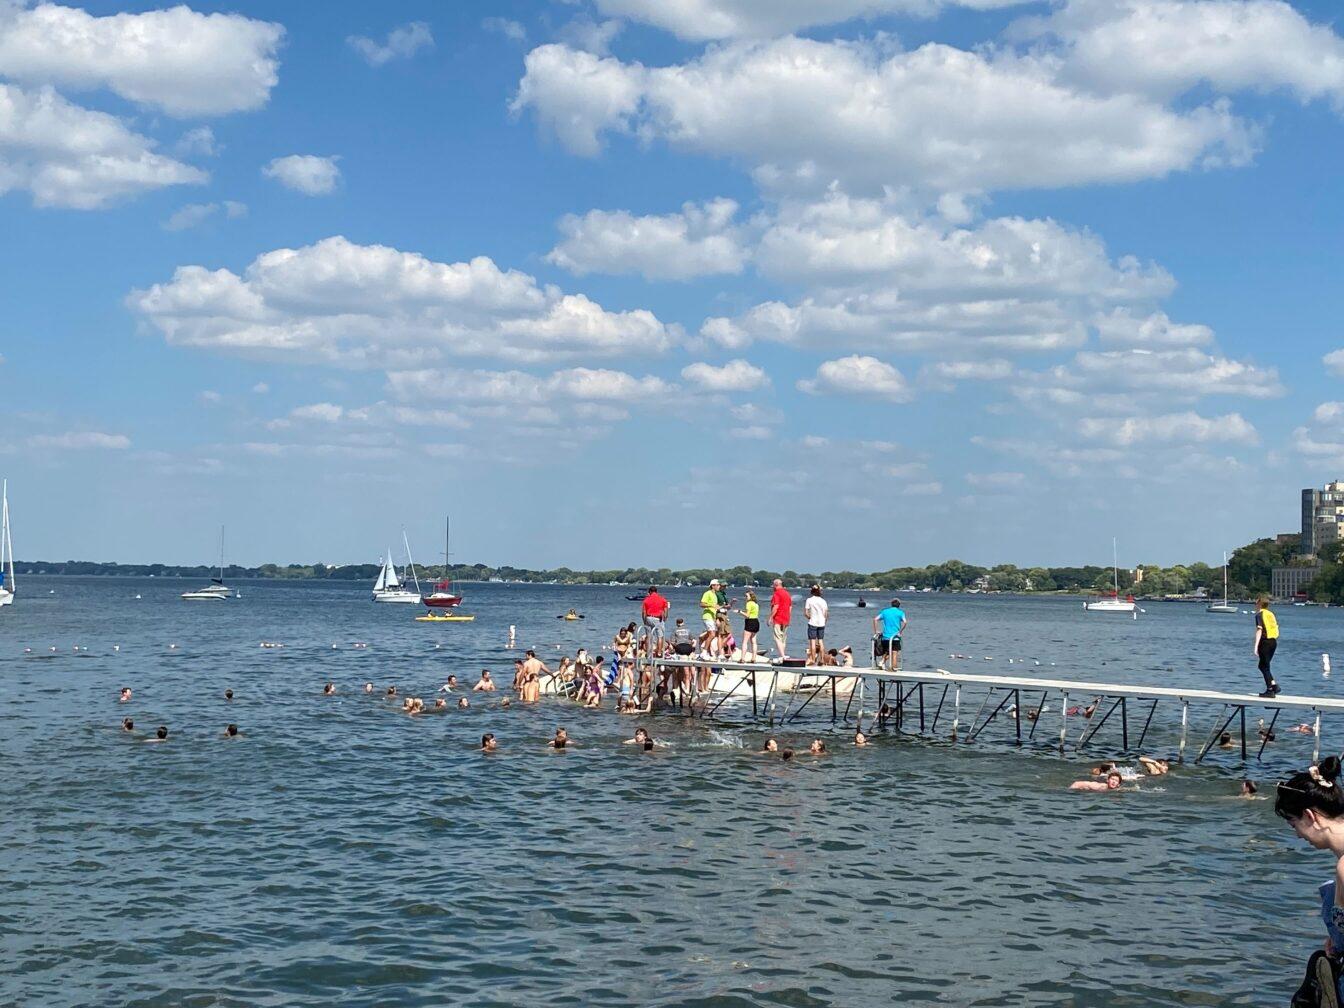 Major section of Memorial Union dock collapses, plunging students into water